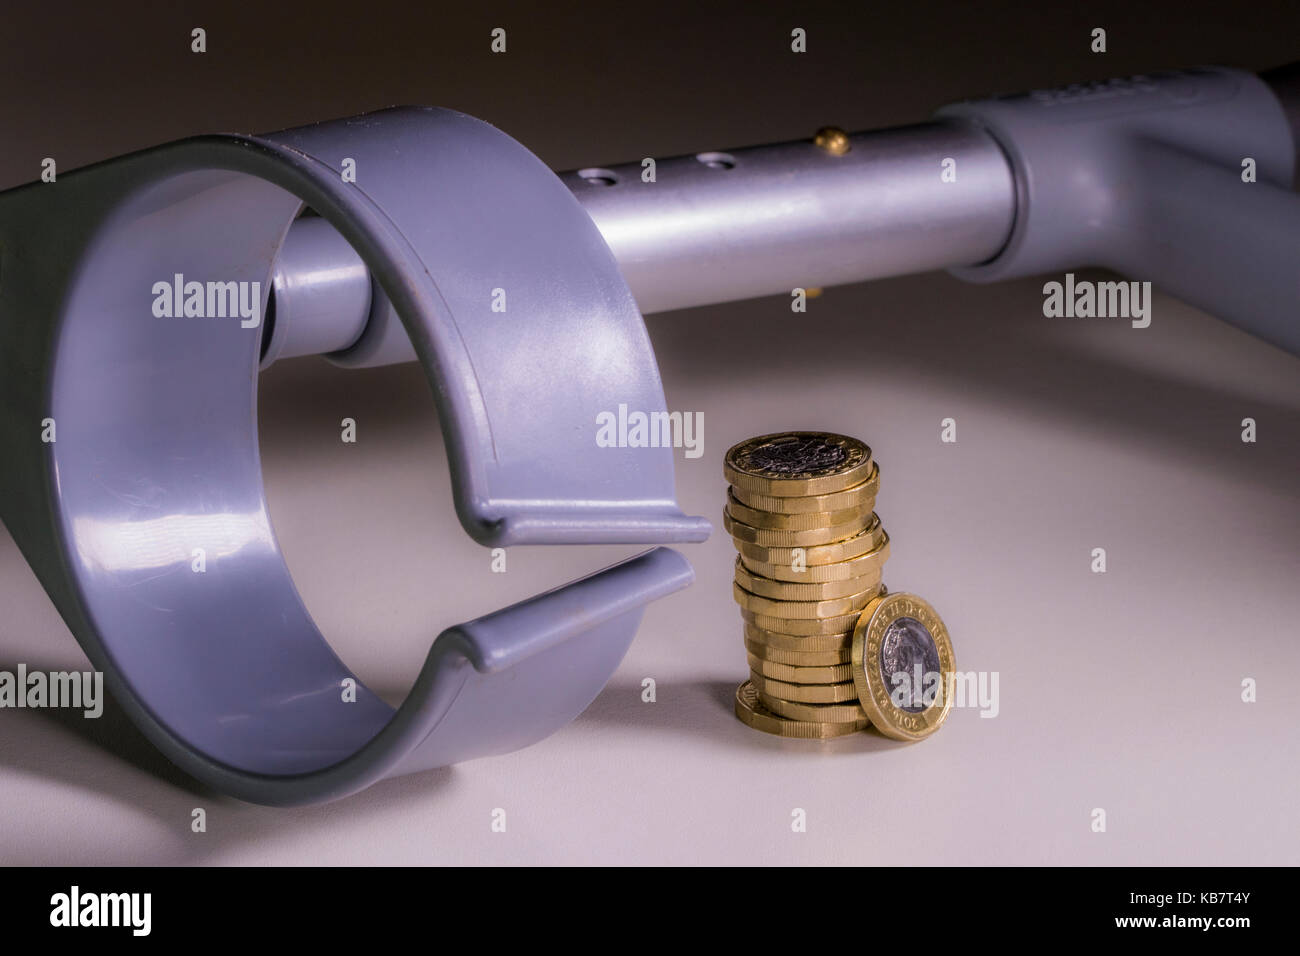 A crutch and new sterling pound coins. Concept of link between incapacity and UK pounds sterling, such as disability income and healthcare cost. Stock Photo